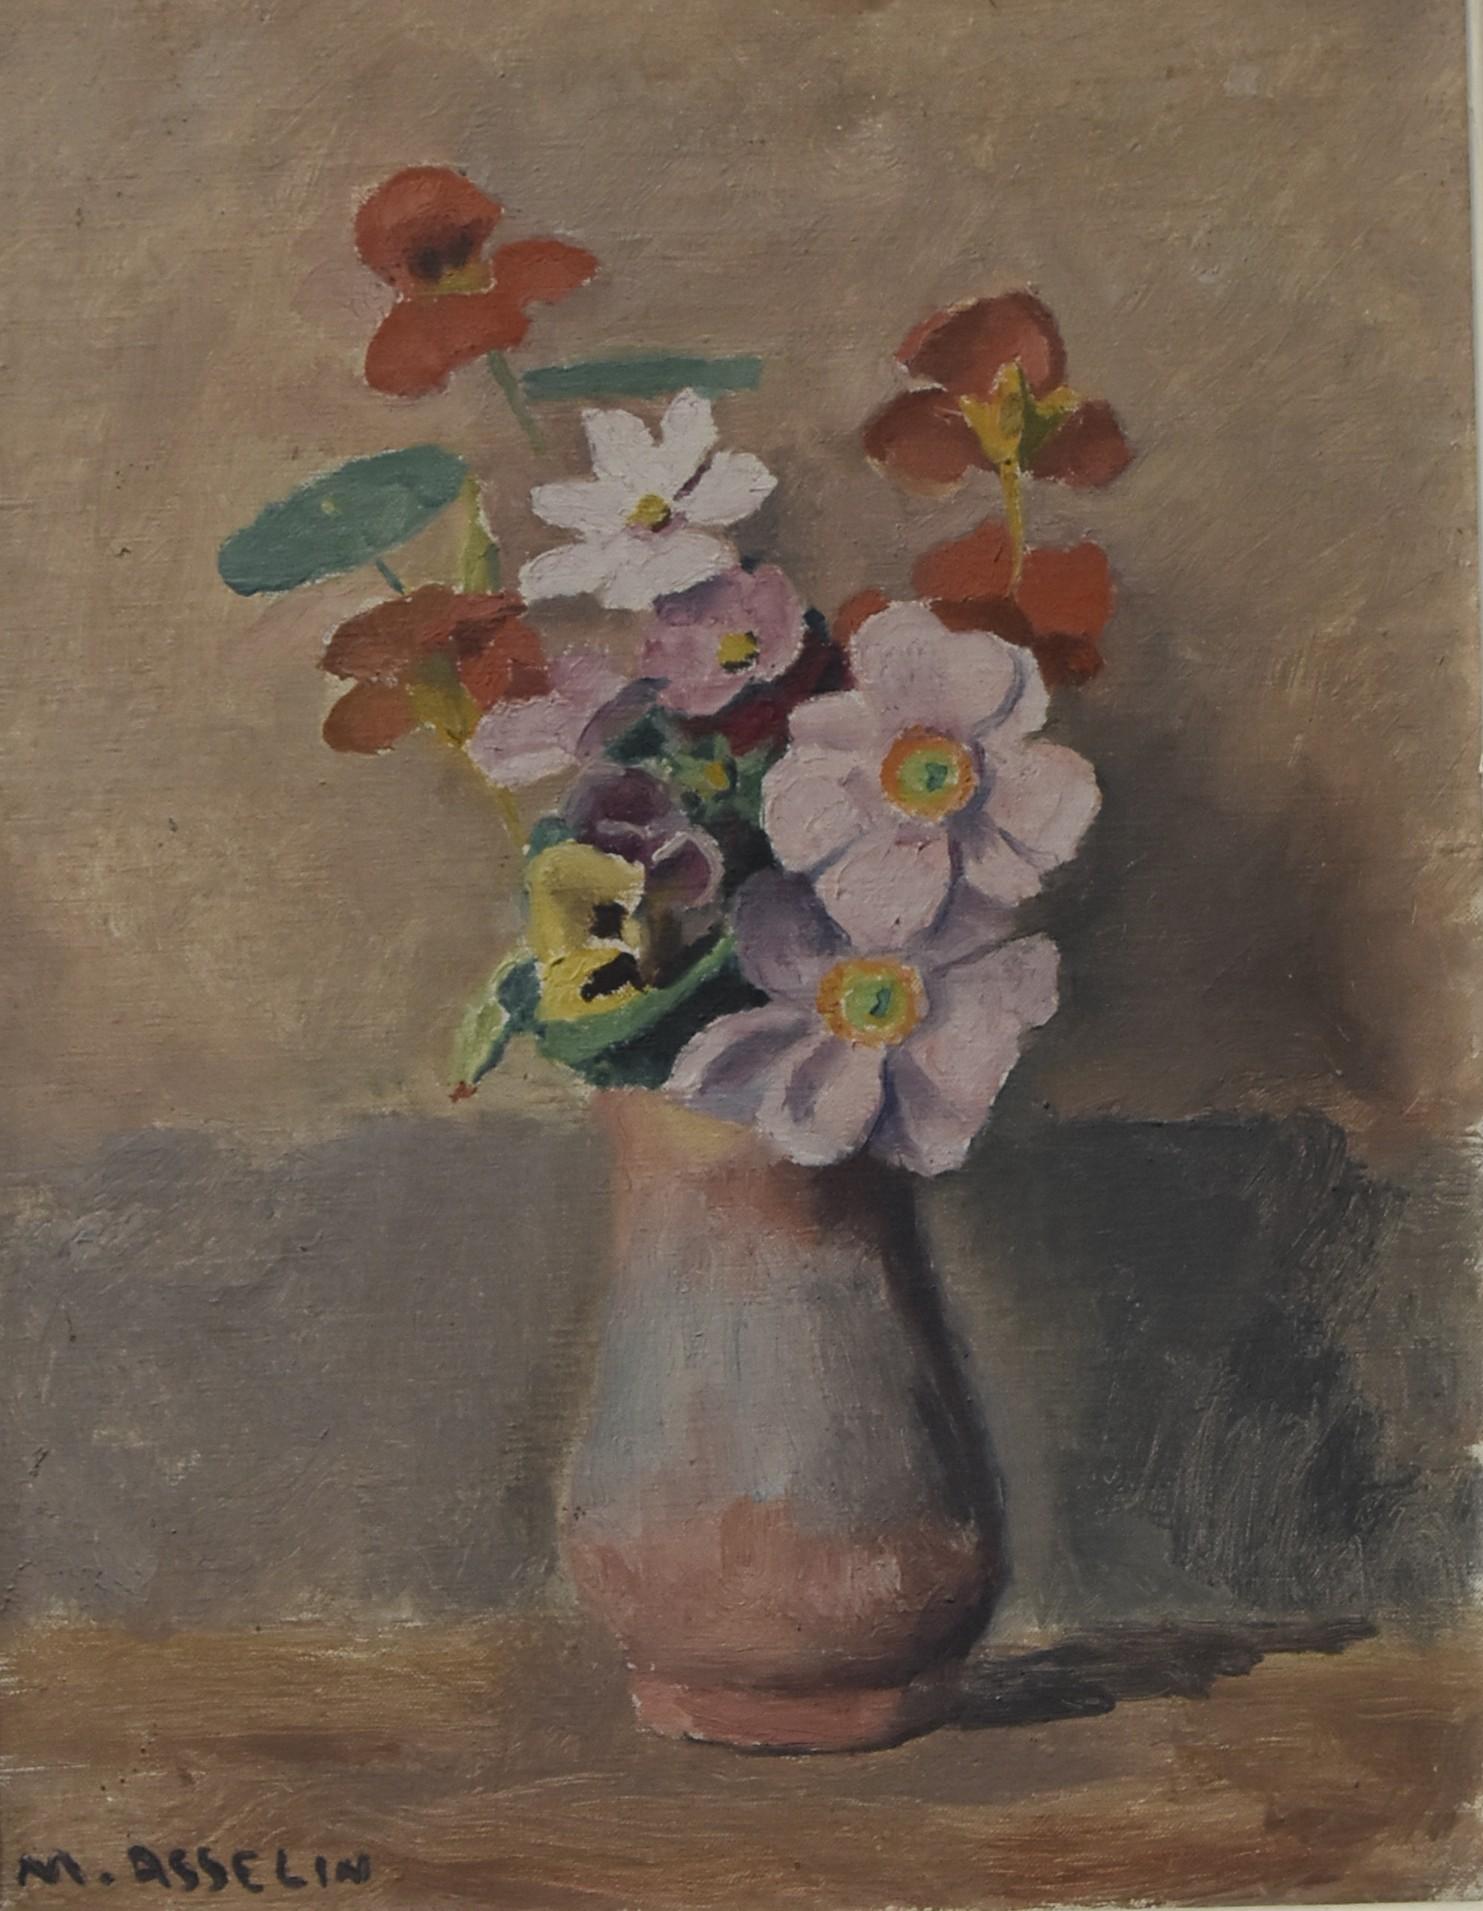 Maurice Asselin (1882-1947) 
A Bunch of  flowers in a vase
Signed lower left
Oil on canvas
35 x 27 cm
In good condition, only a slight dent in the upper part as seen on the pictures
In its original frame : 51 x 41.5 cm  

This fine example of